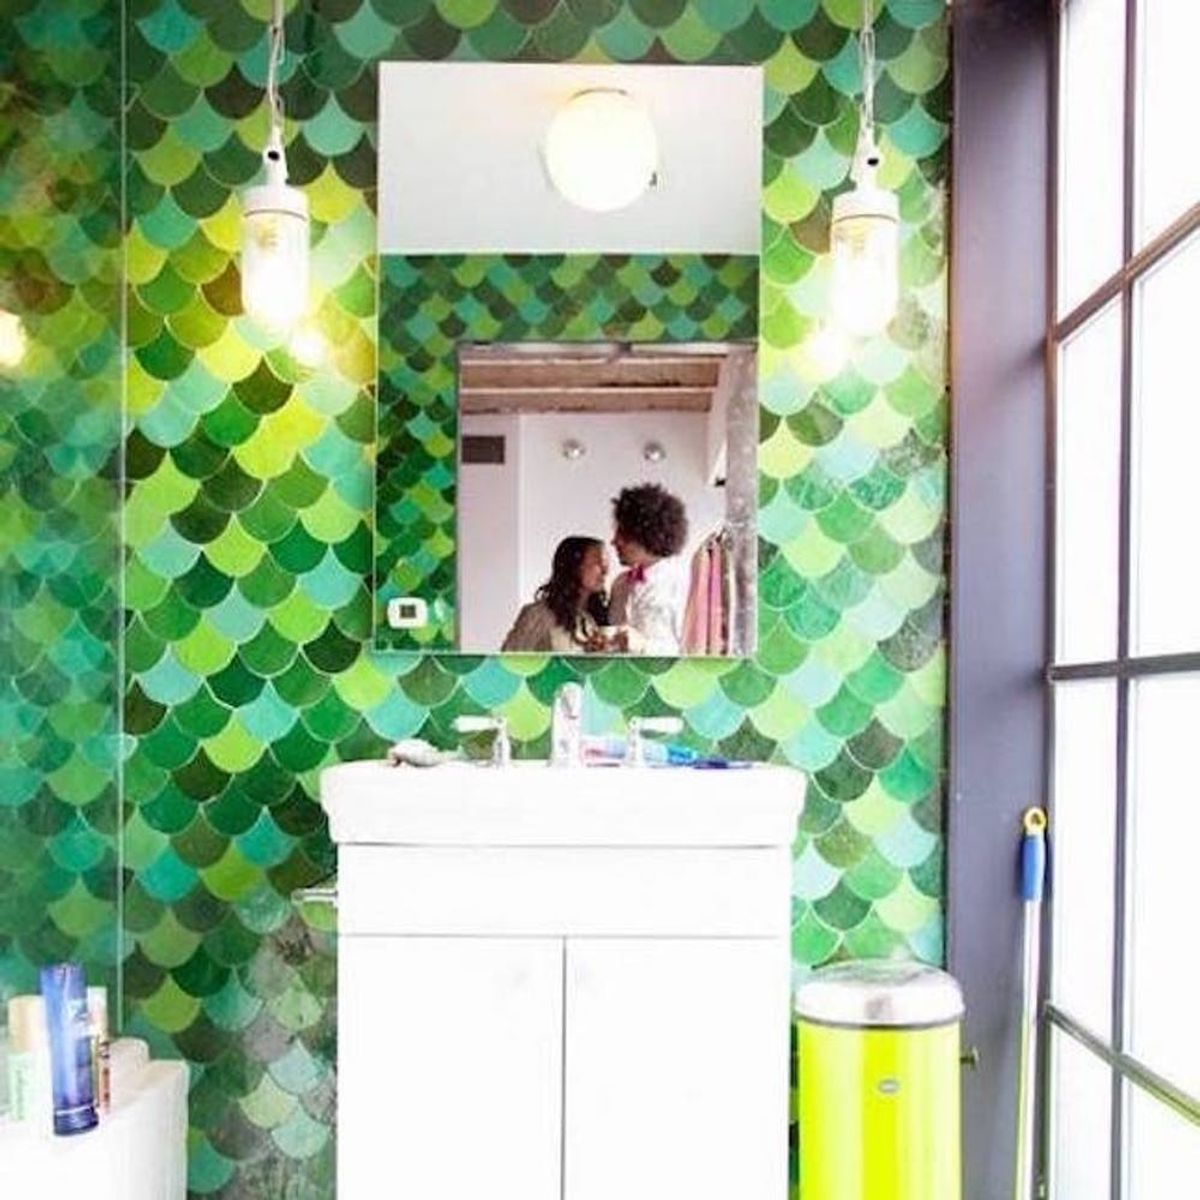 12 Ways Fish Scale Tiles Will Complete All Your Mermaid Dreams